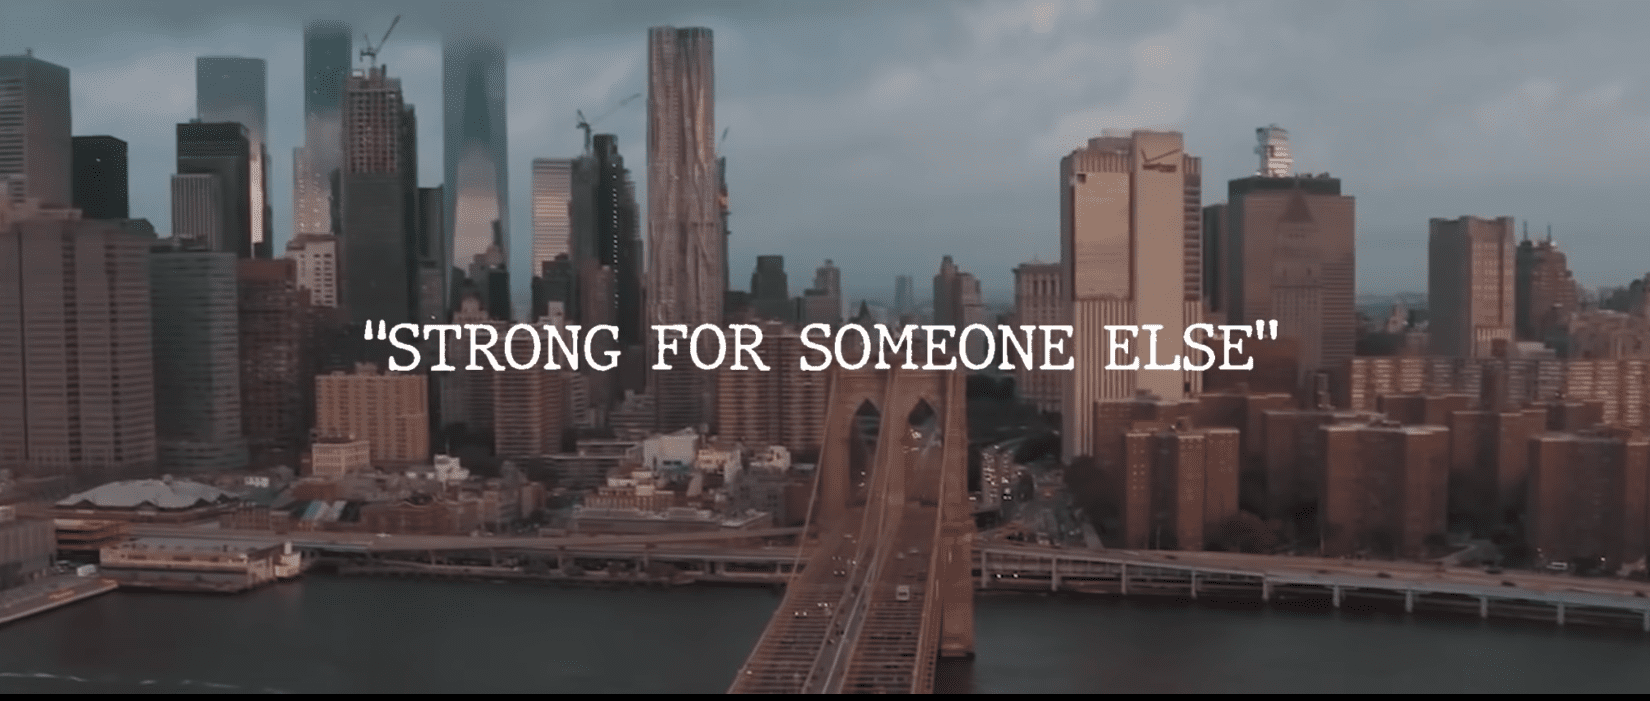 Strong For Someone Else Video Screenshot